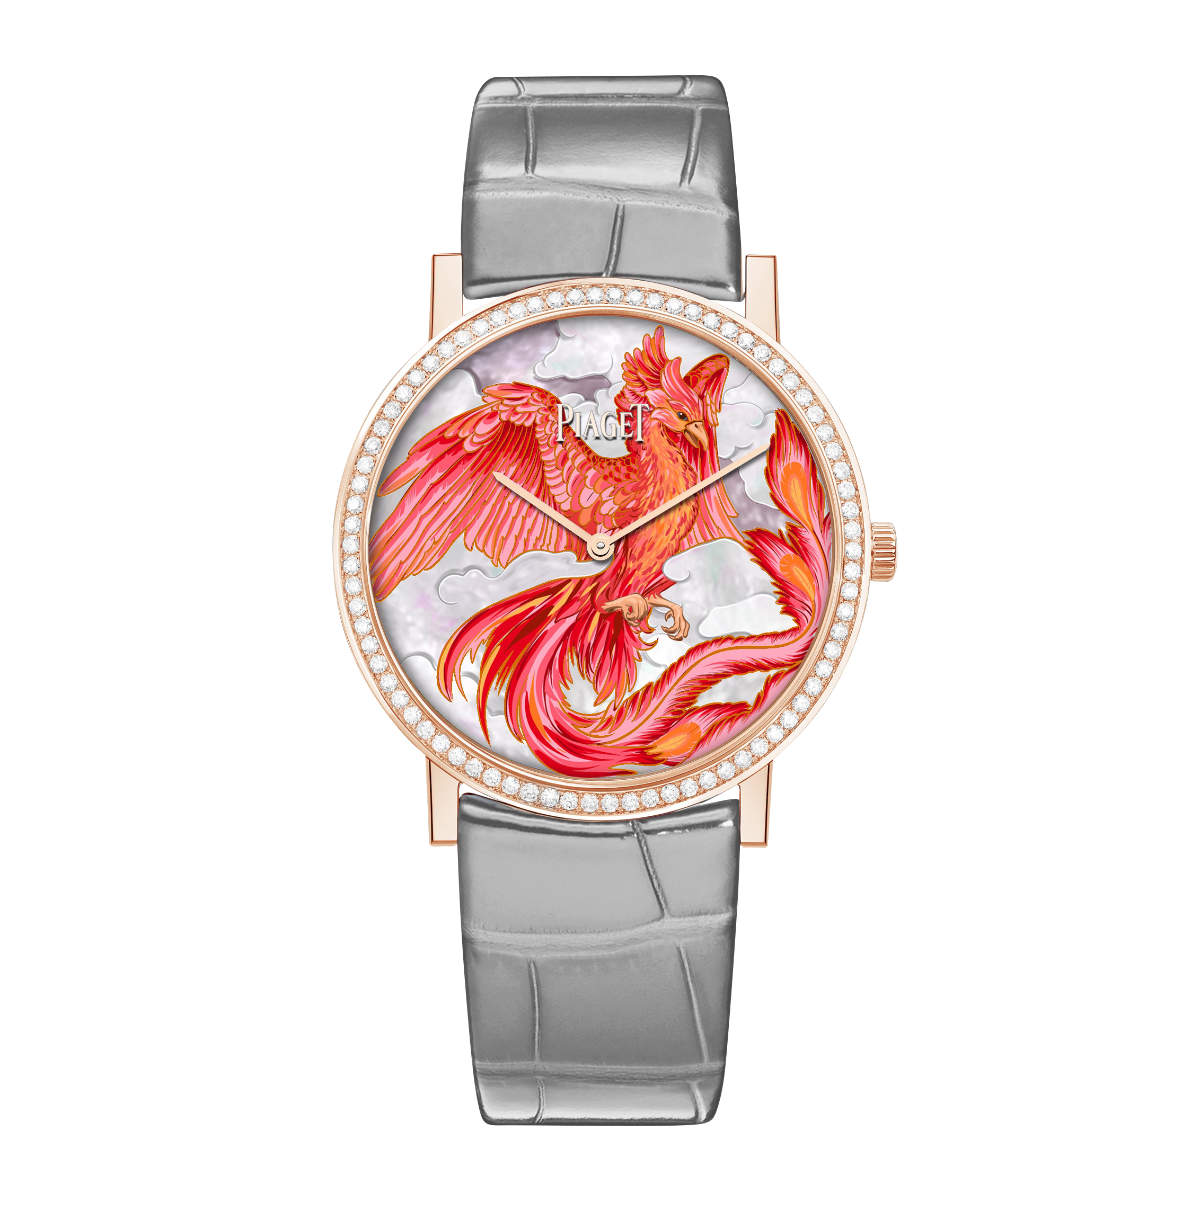 Piaget Presents Its Lunar New Year Capsule Collection: Dragon & Phoenix